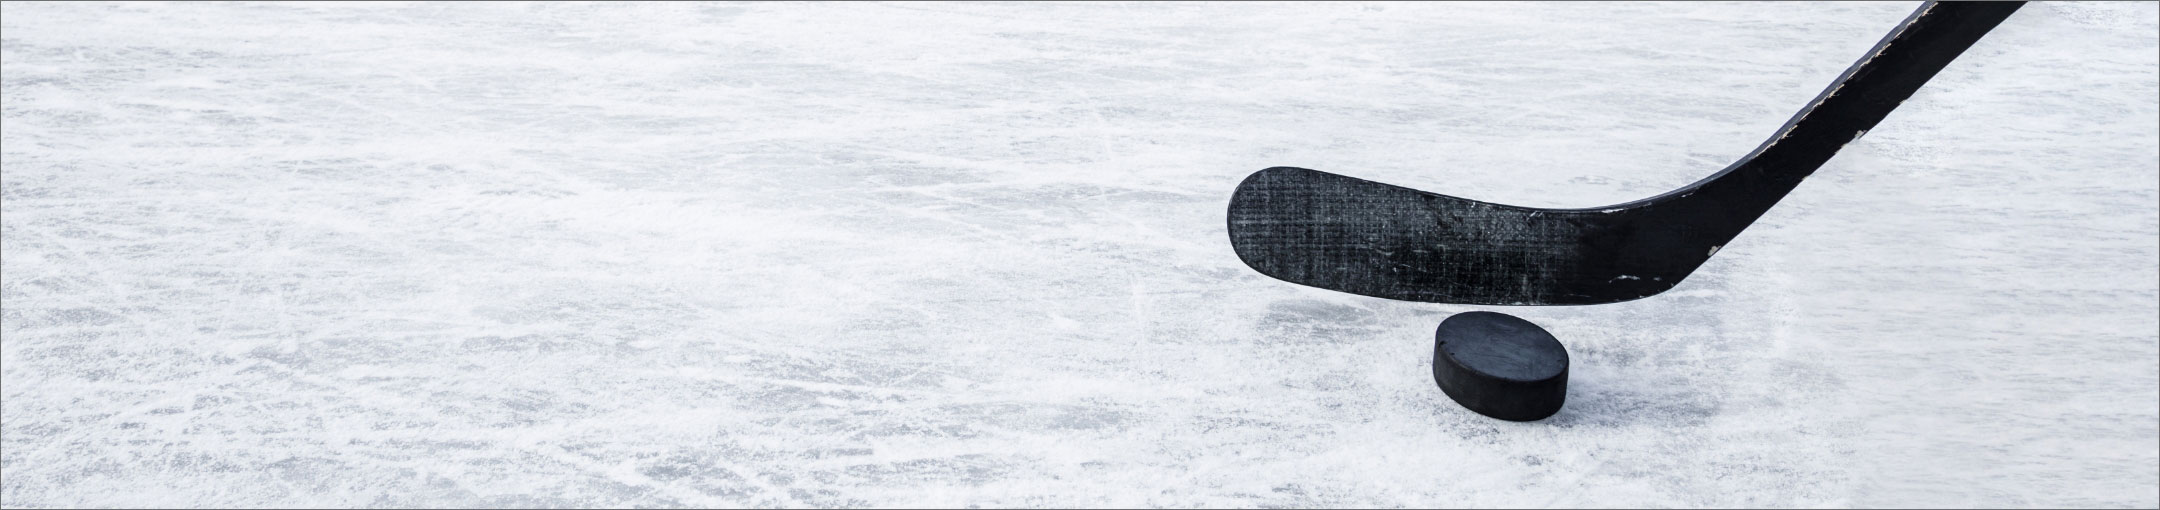 a hockey stick and puck on ice